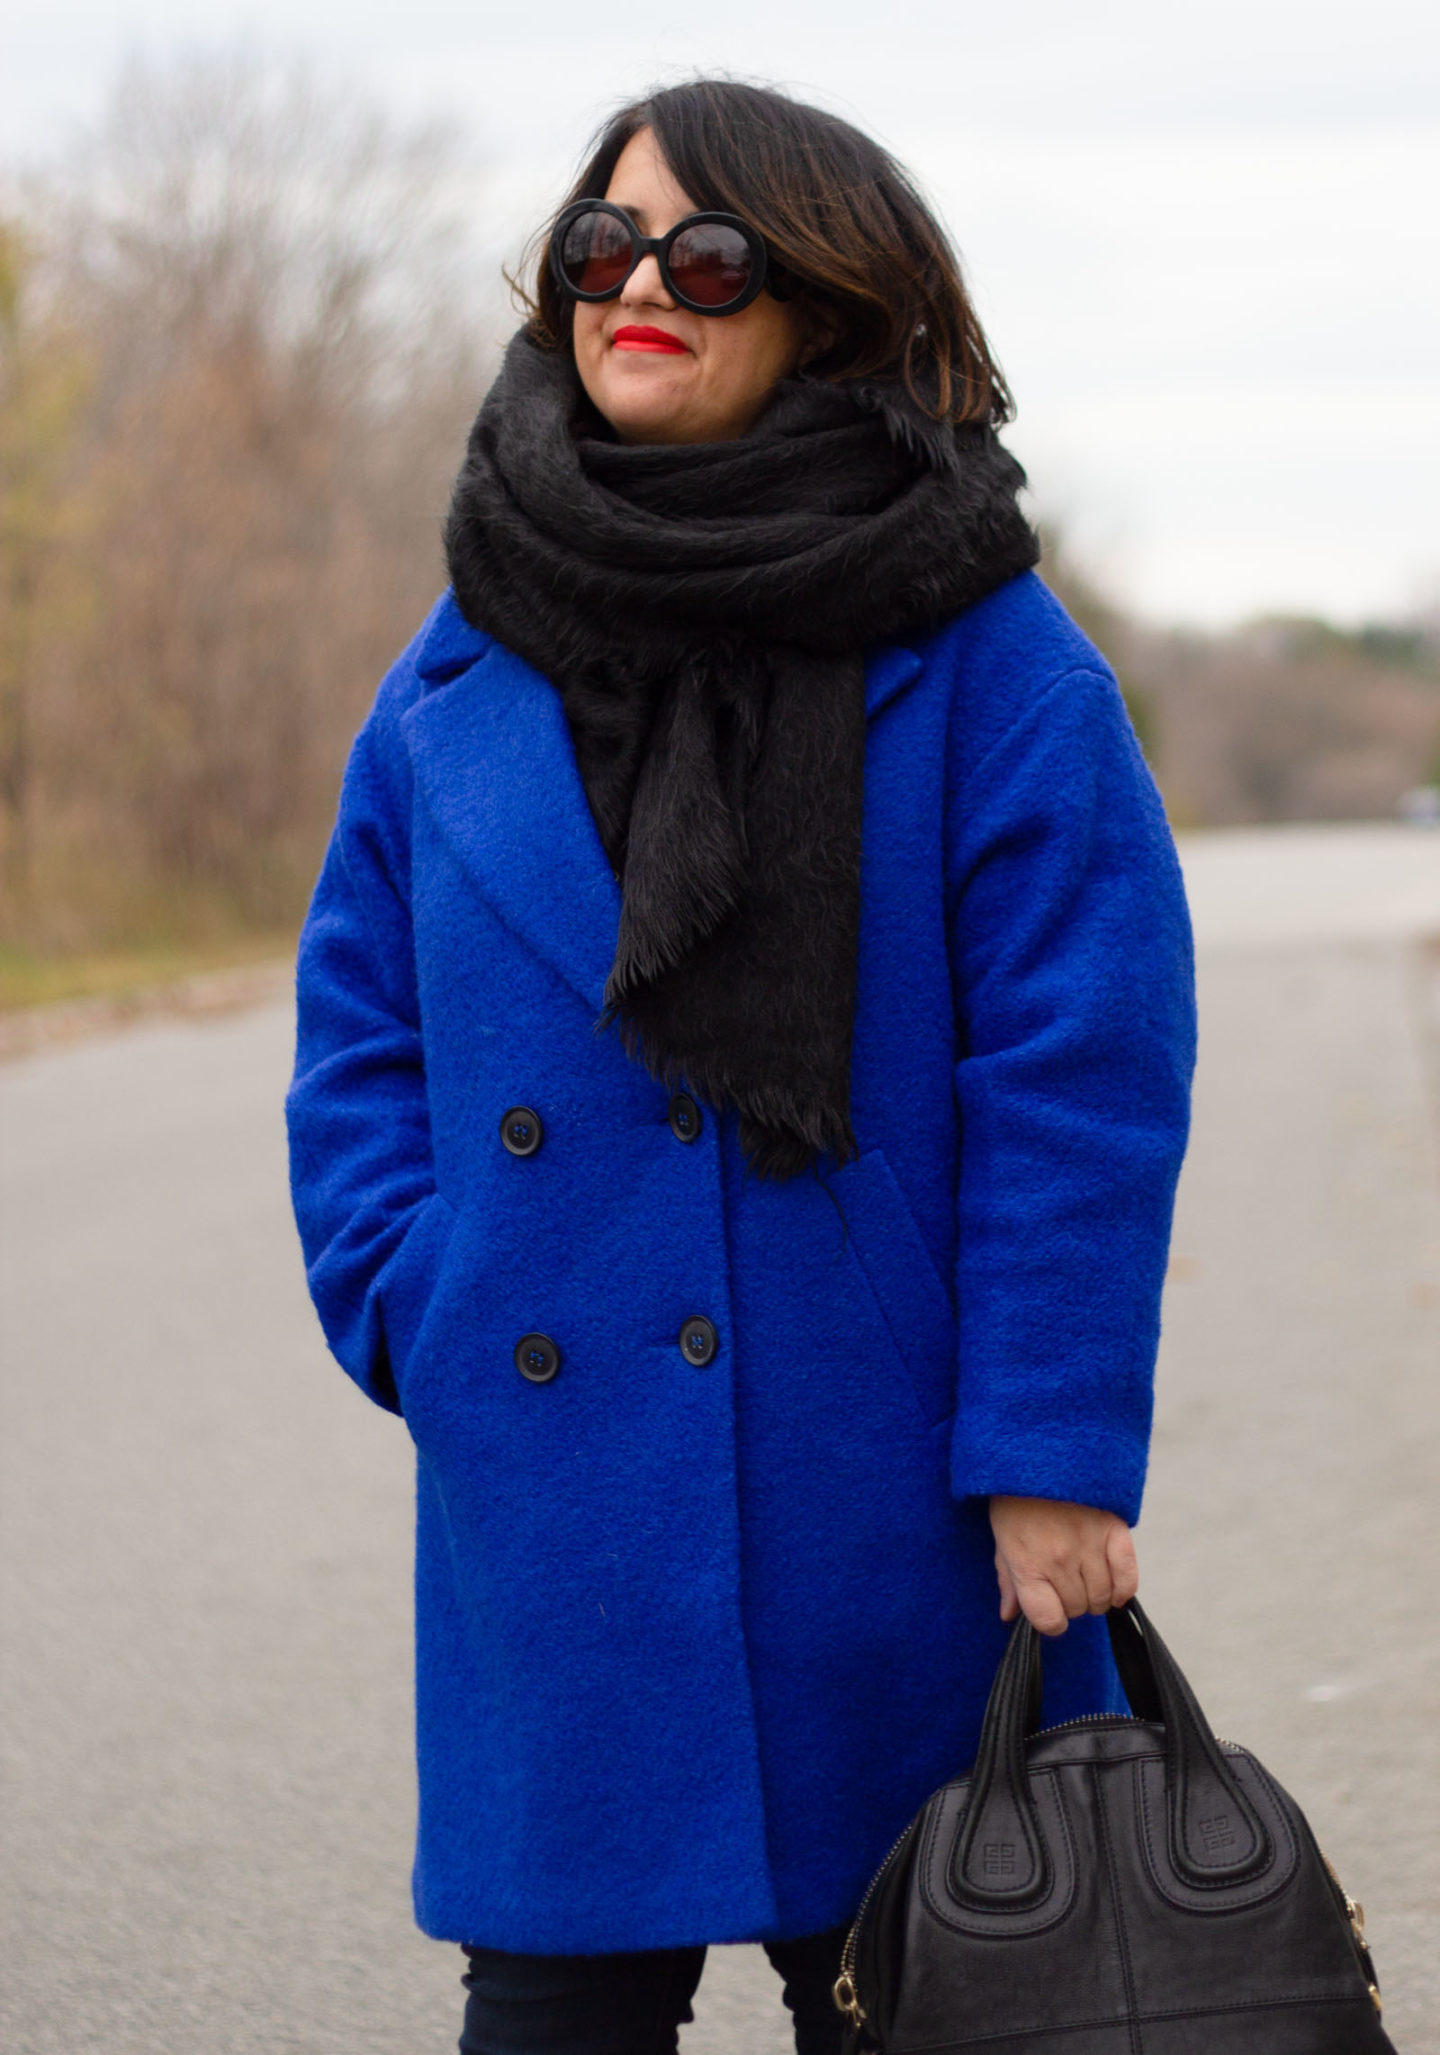 Black and blue winter outfit